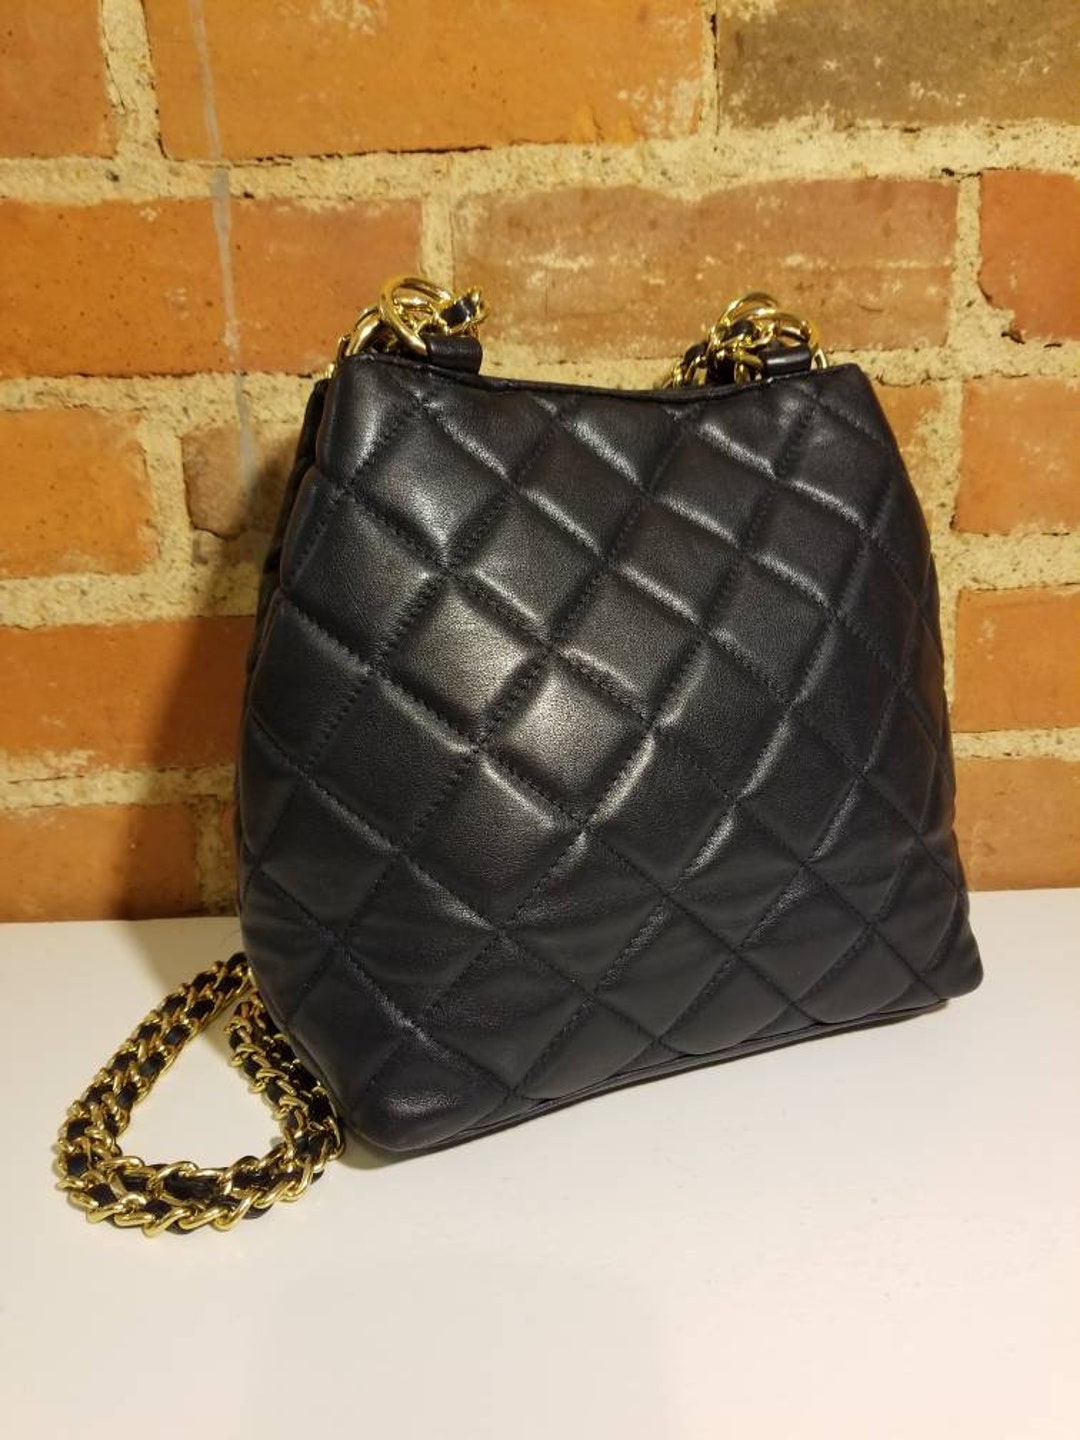 A 1970s/80s dark blue quilt leather shoulder bag by Chanel